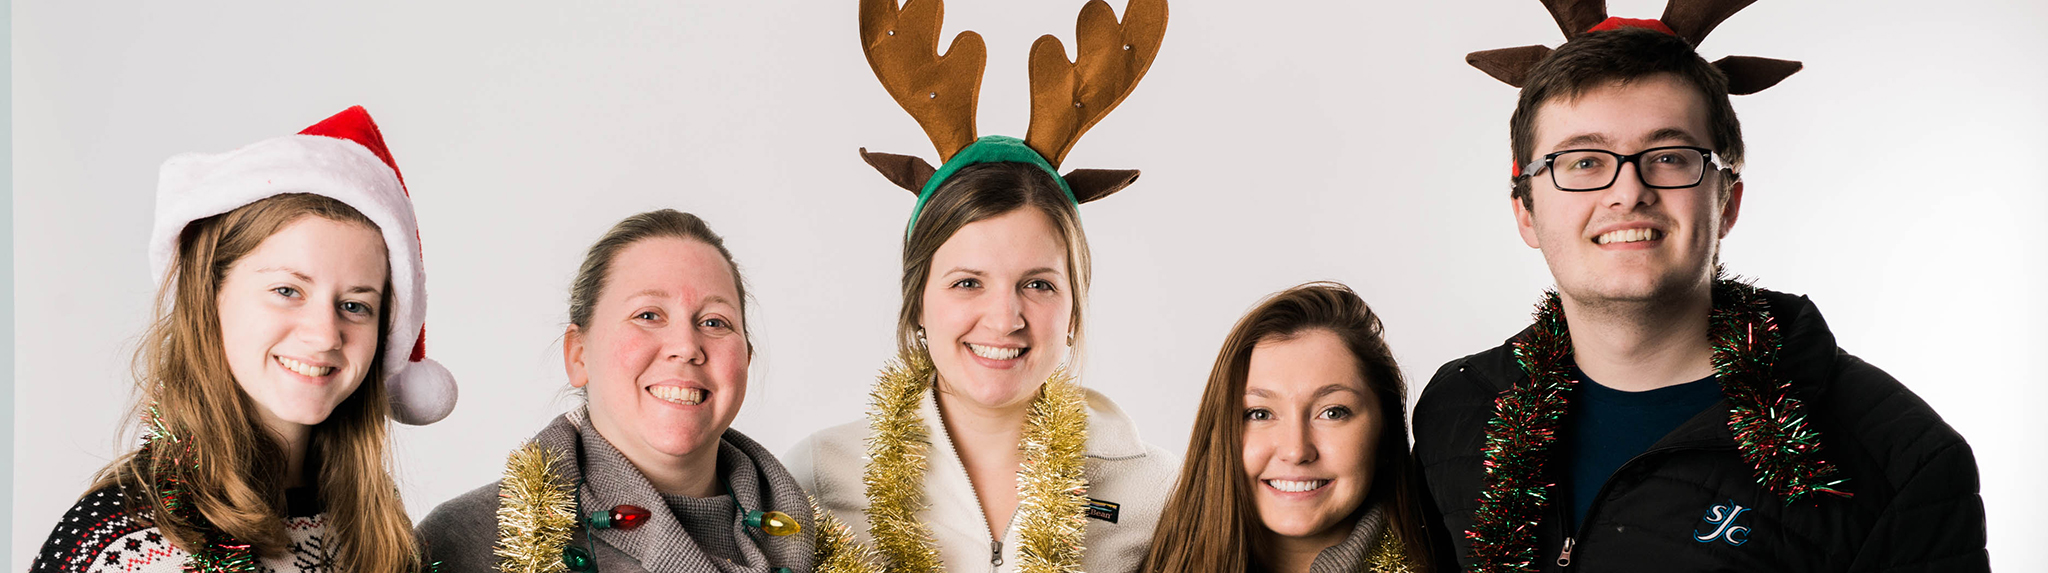 Students at the holiday photo booth